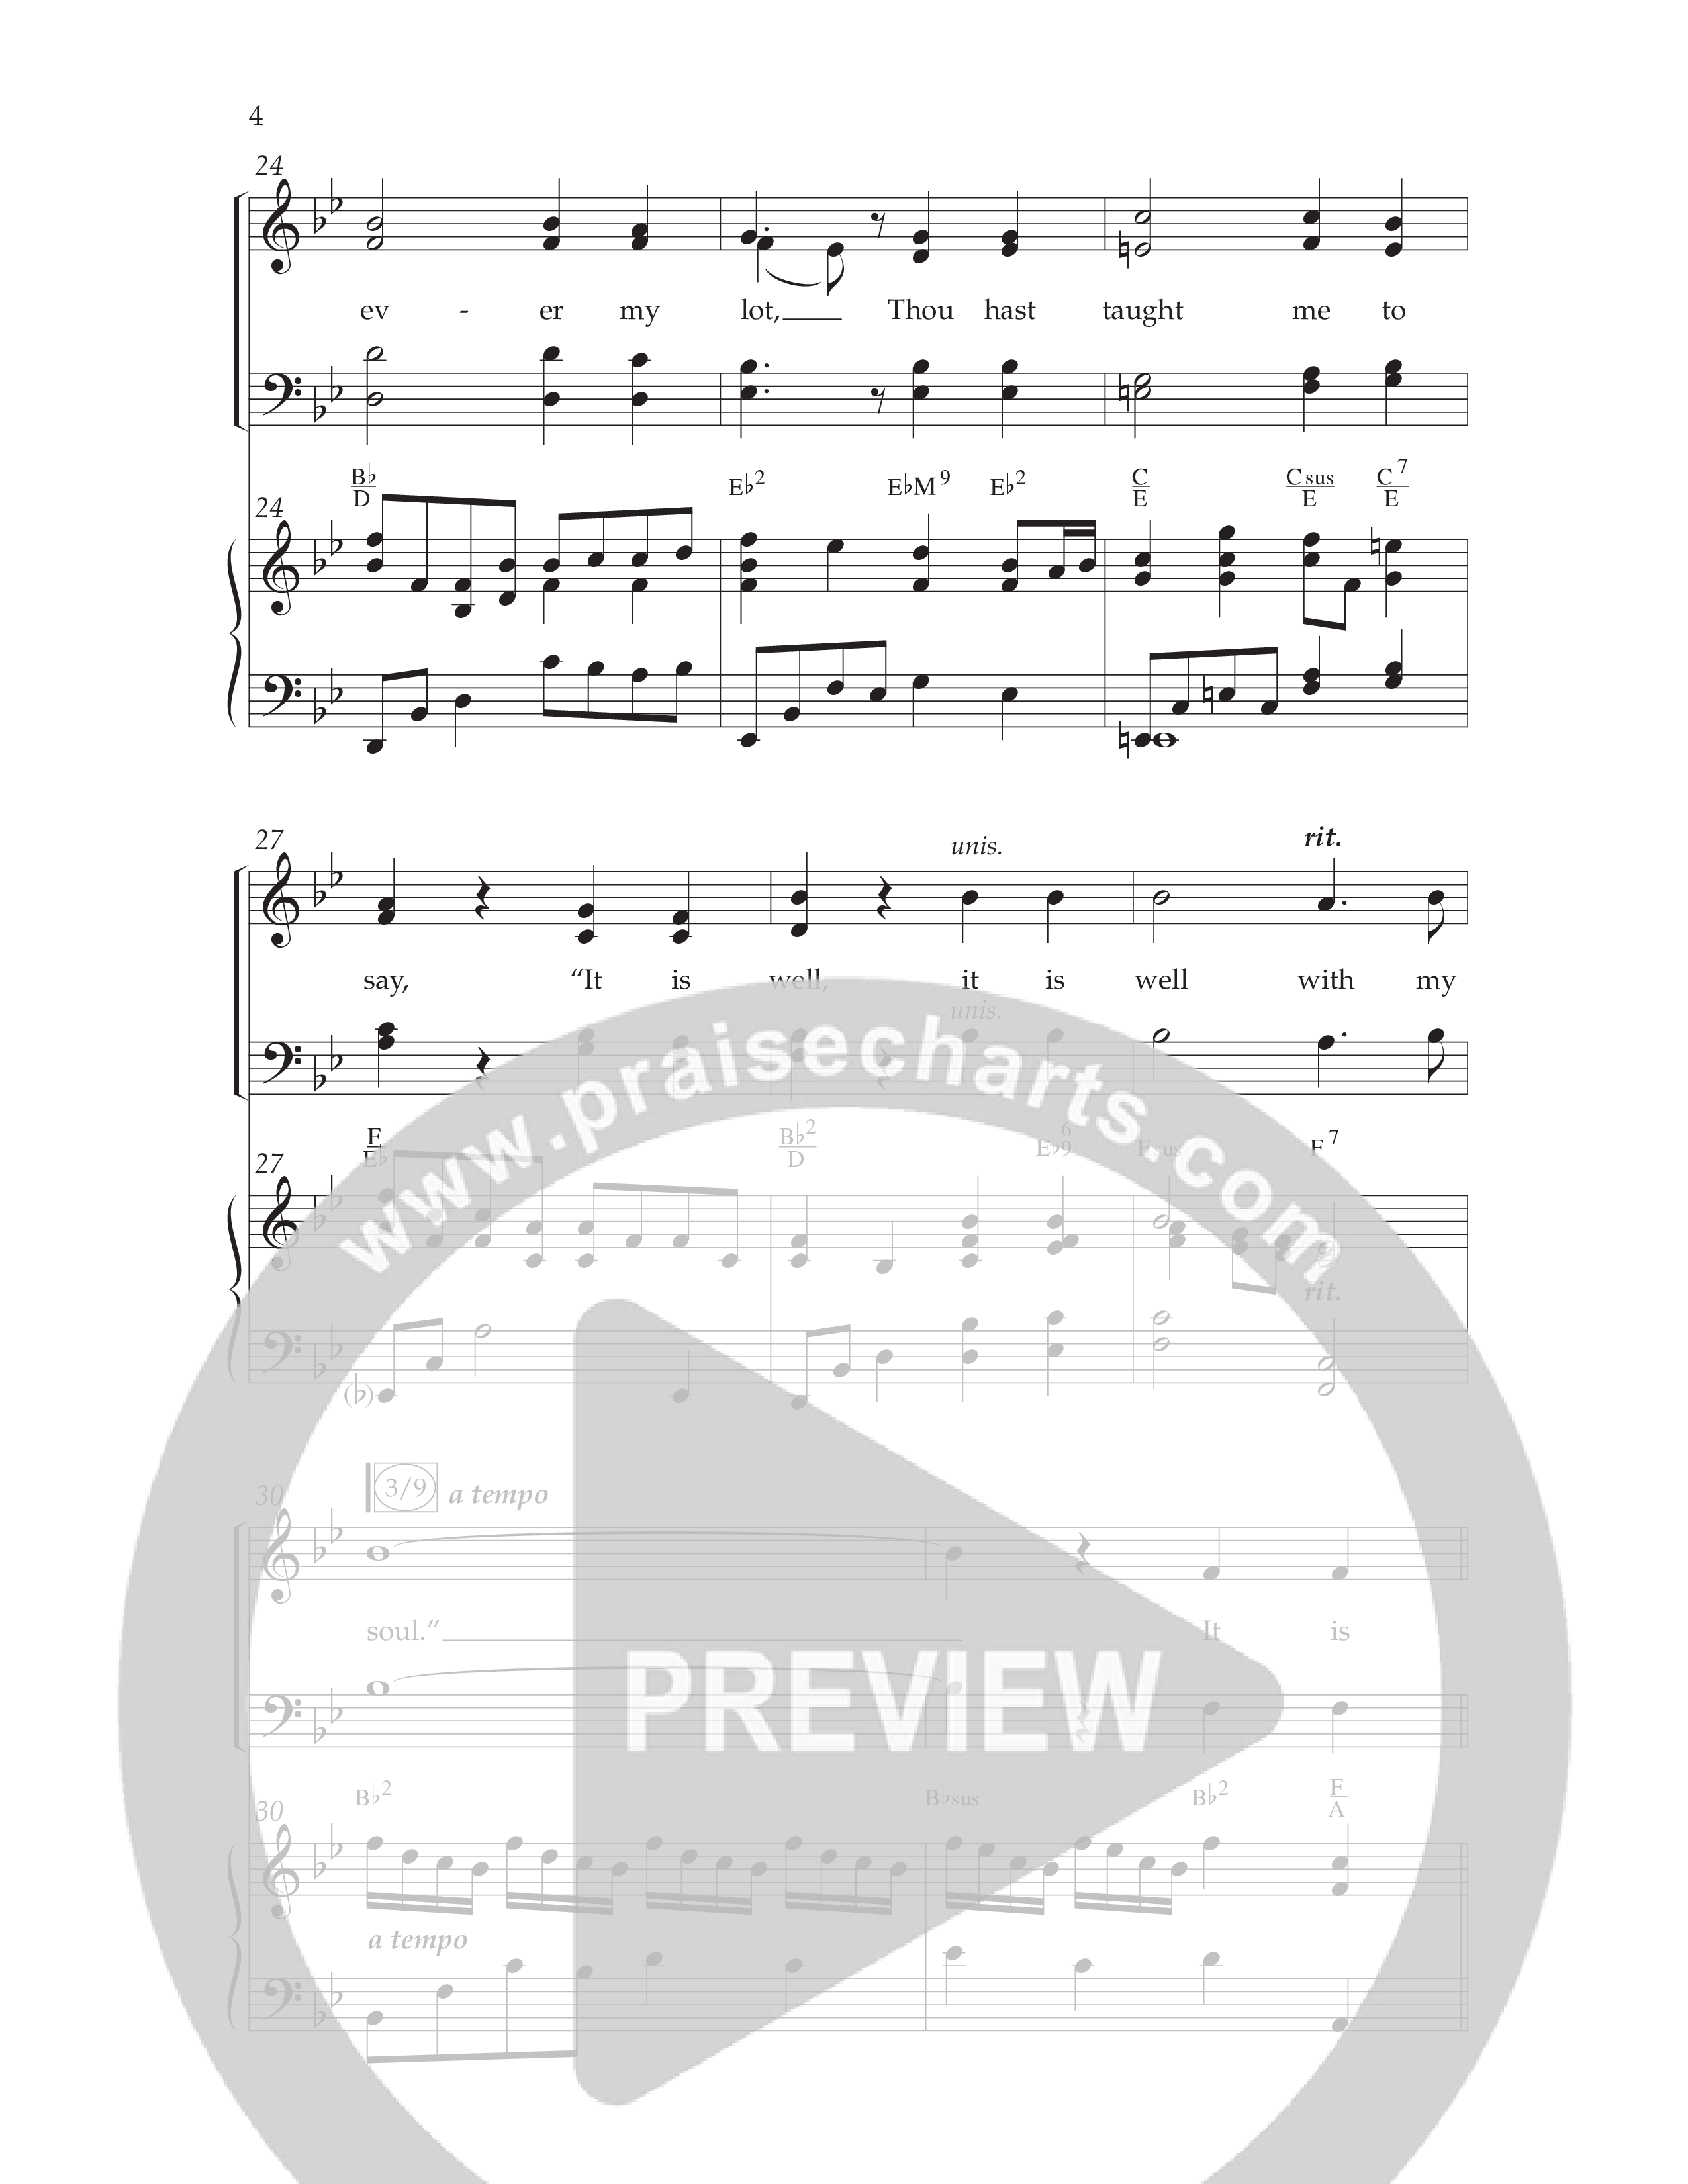 It Is Well With My Soul (Choral Anthem SATB) Anthem (SATB/Piano) (Lifeway Choral / Arr. John Bolin / Orch. David Clydesdale)